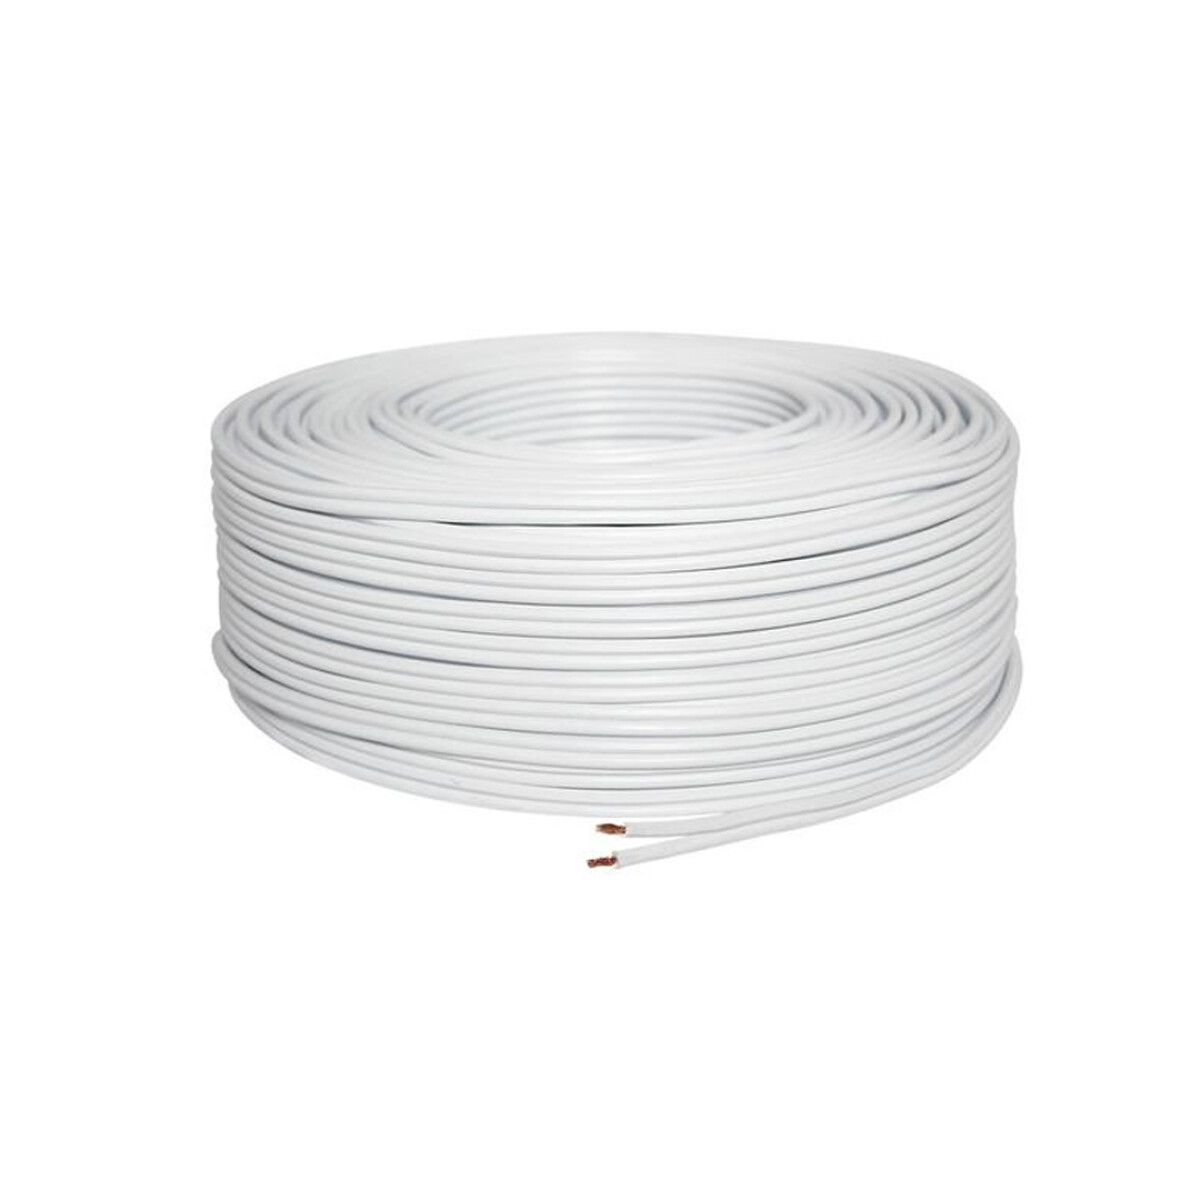 Cable Gemelo - 1 mm Blanco 